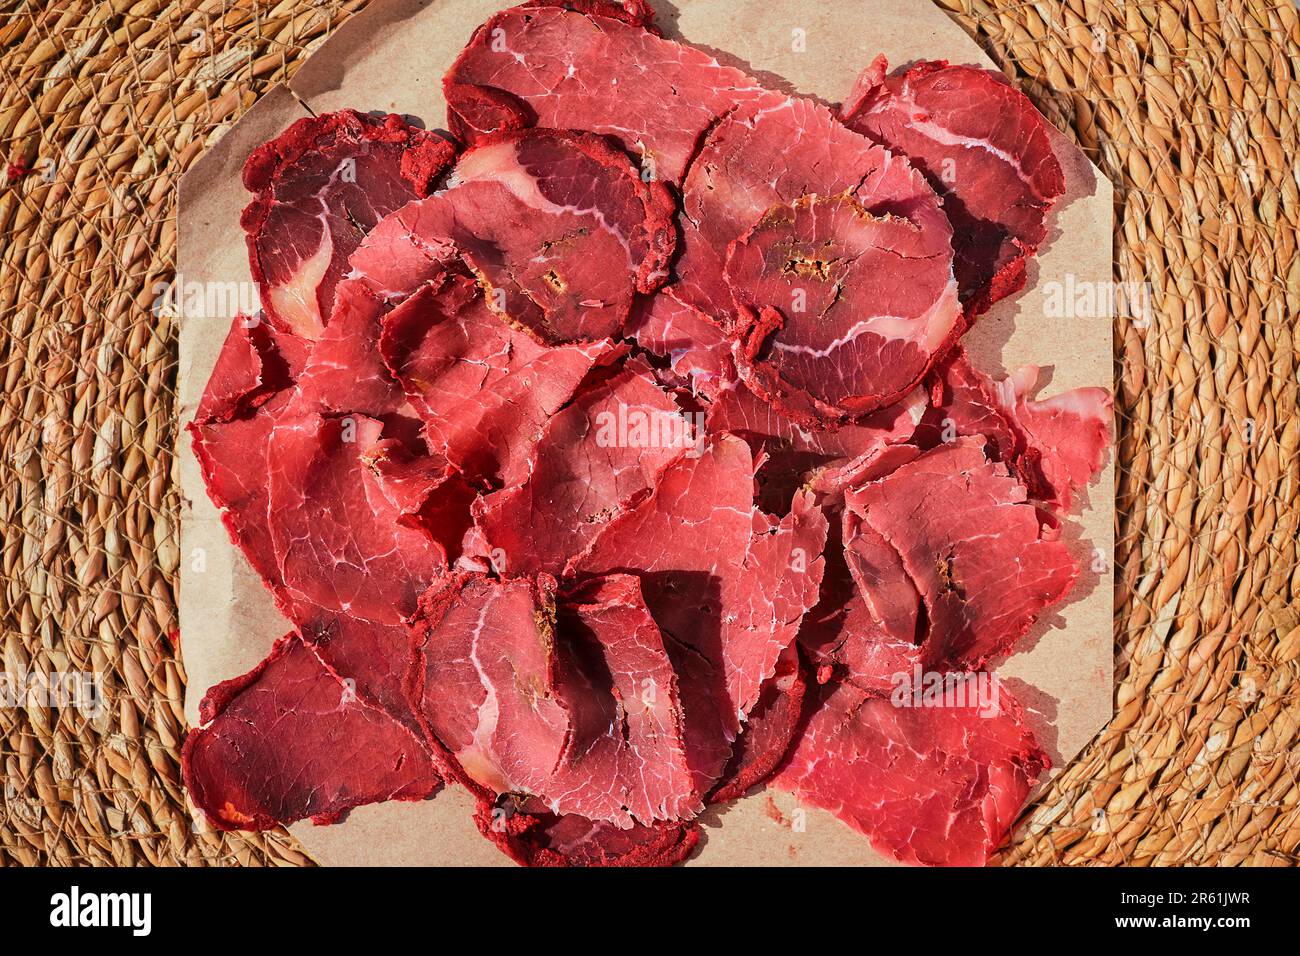 Turkish bacon, pastrami or kayseri pastirma. Fresh sliced pastrami on a paper lining, top view. Stock Photo